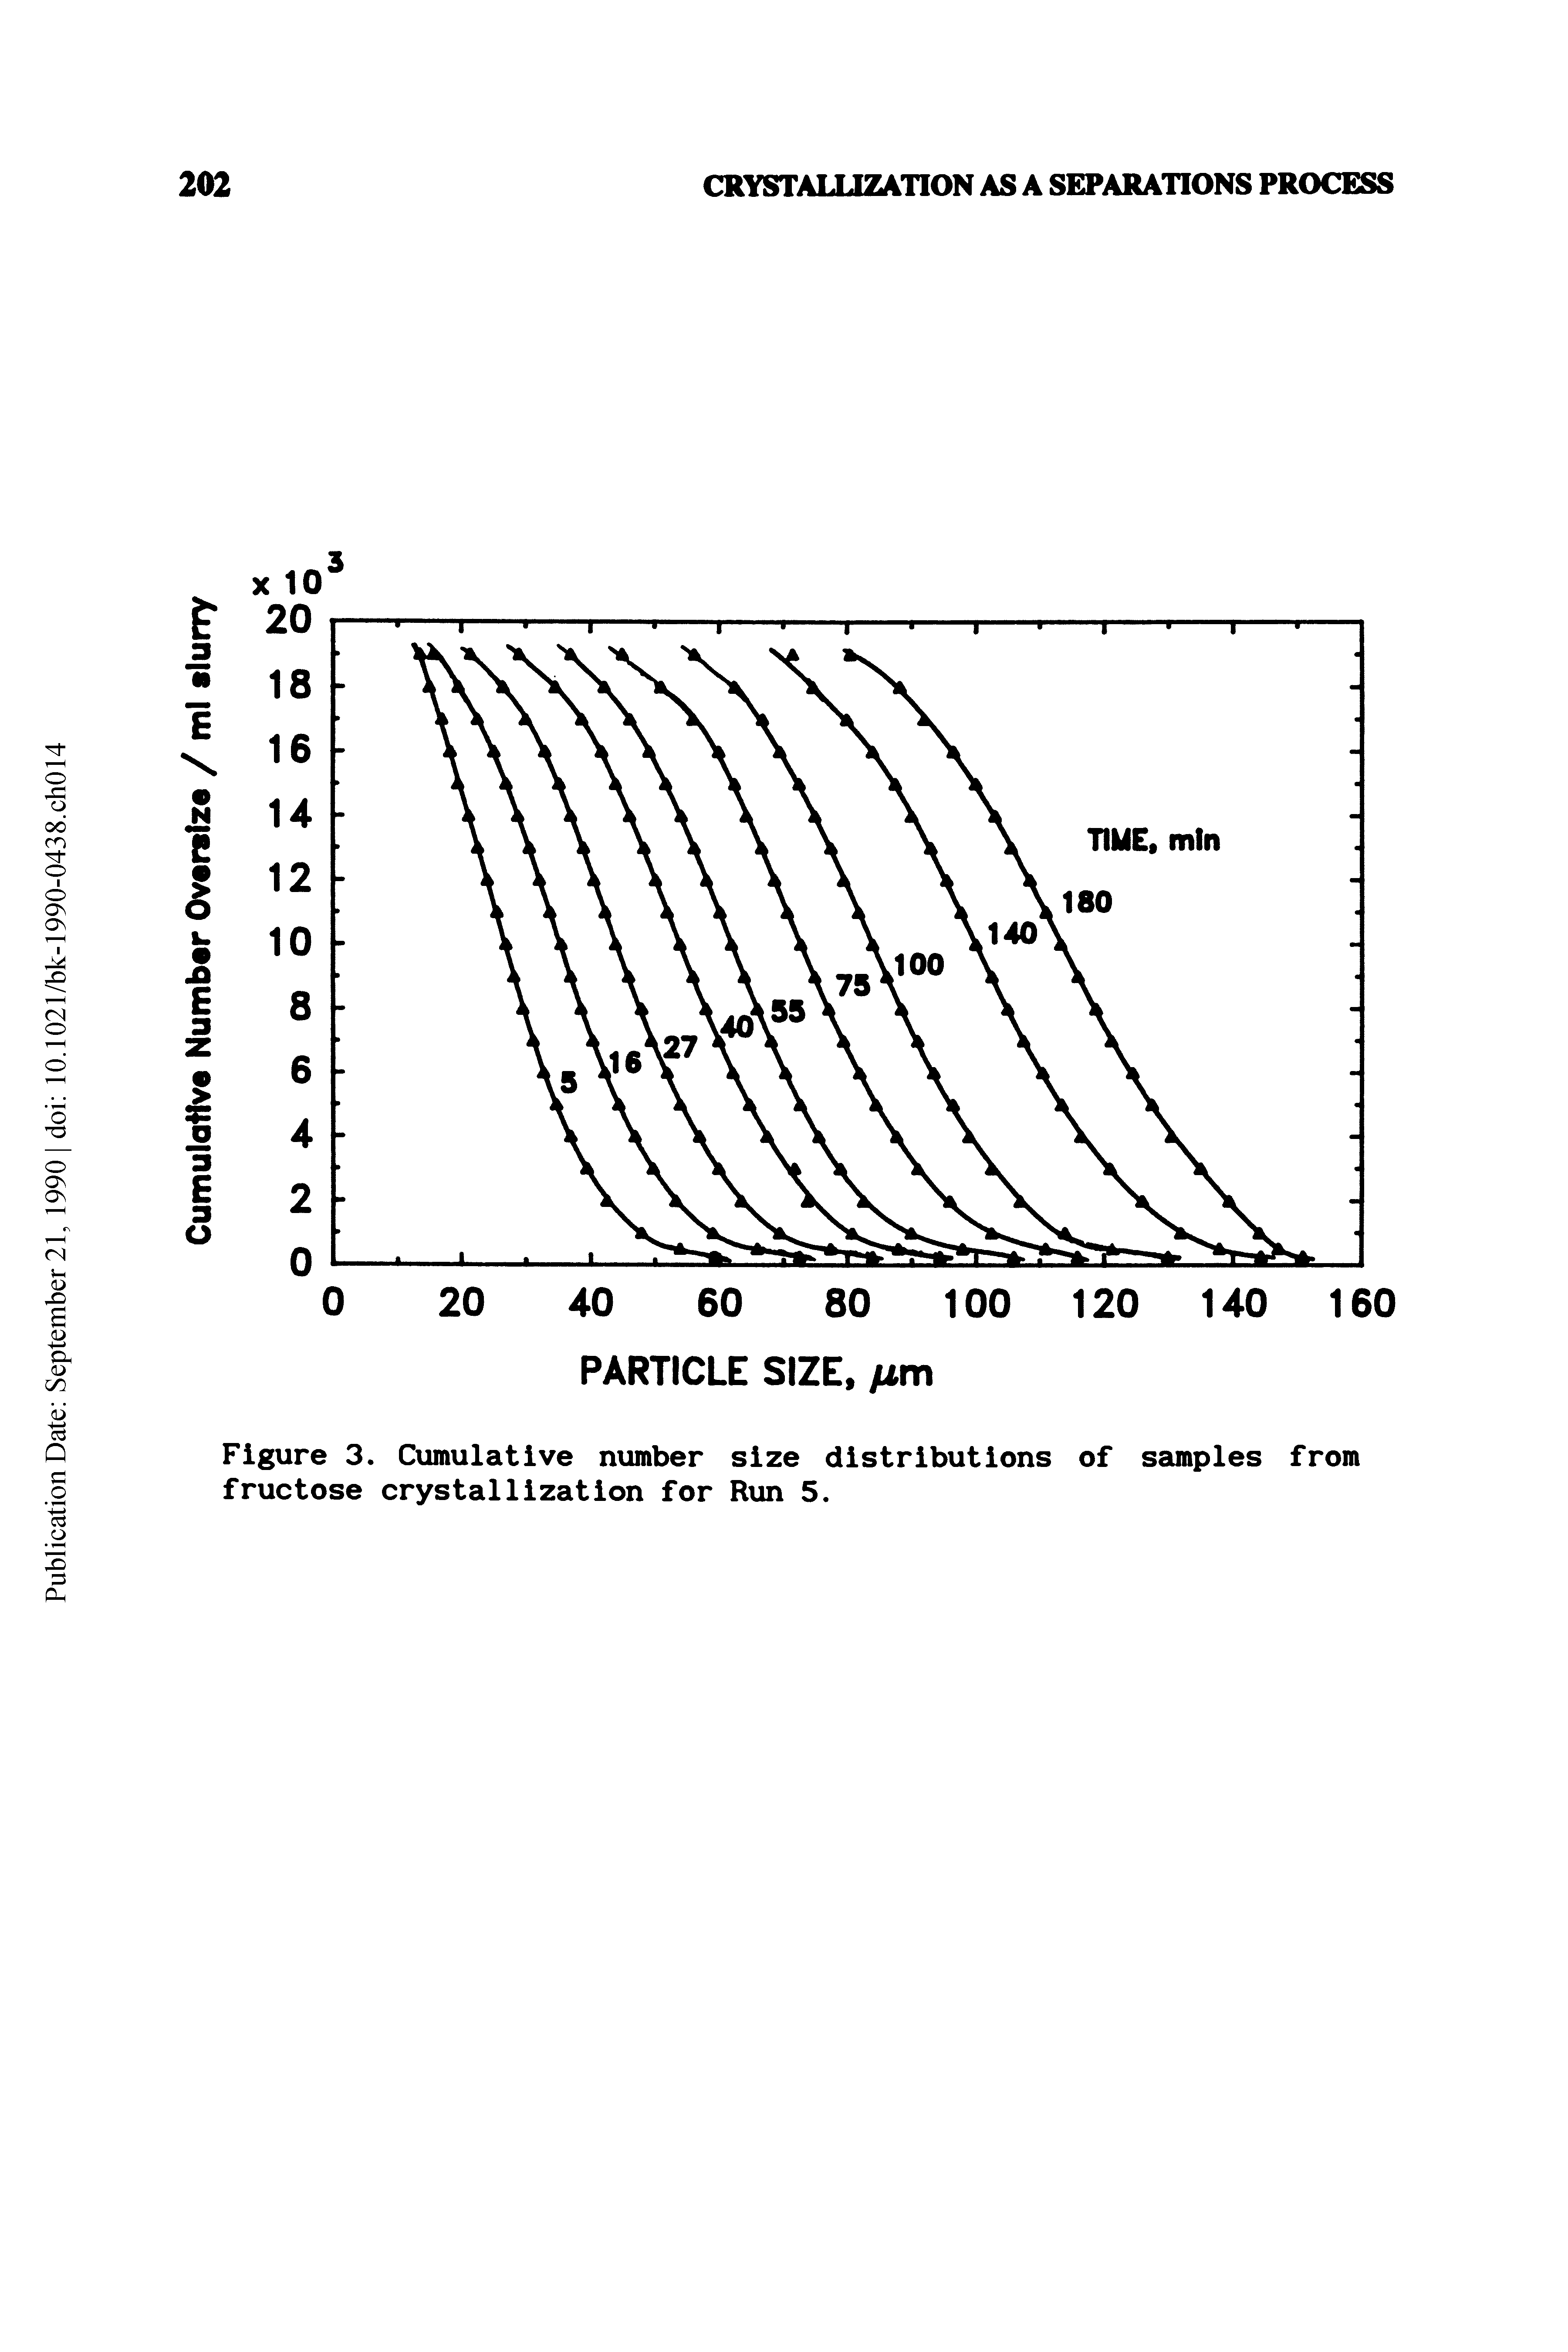 Figure 3. Cumulative number size distributions of samples from fructose crystallization for Run 5.